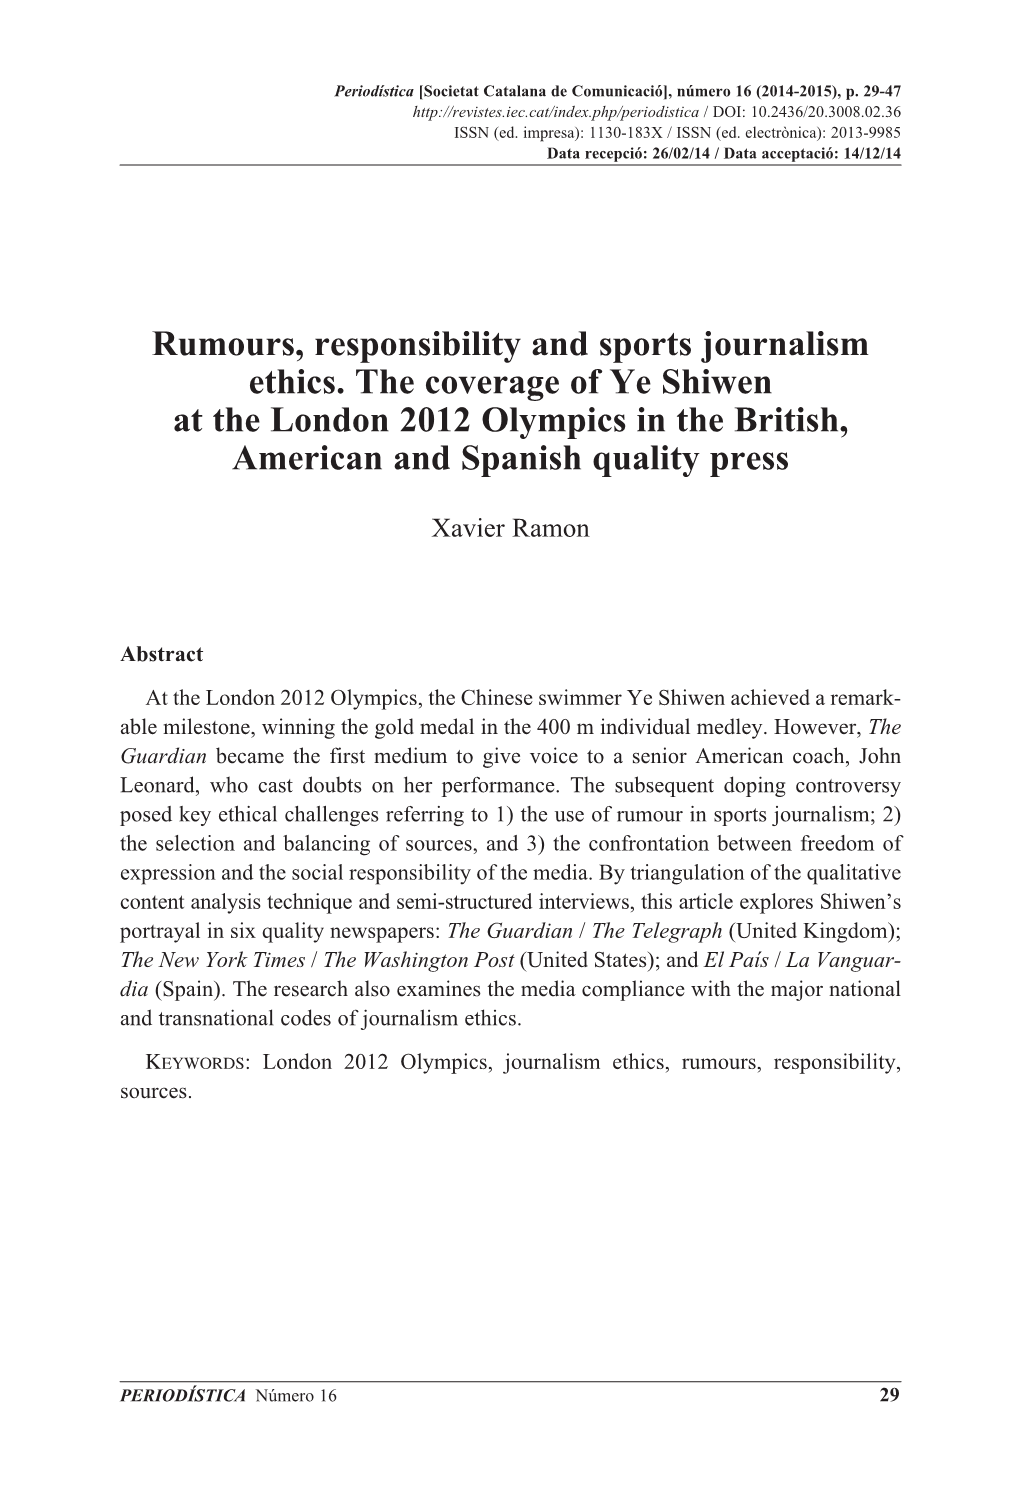 Rumours, Responsibility and Sports Journalism Ethics. the Coverage of Ye Shiwen at the London 2012 Olympics in the British, American and Spanish Quality Press